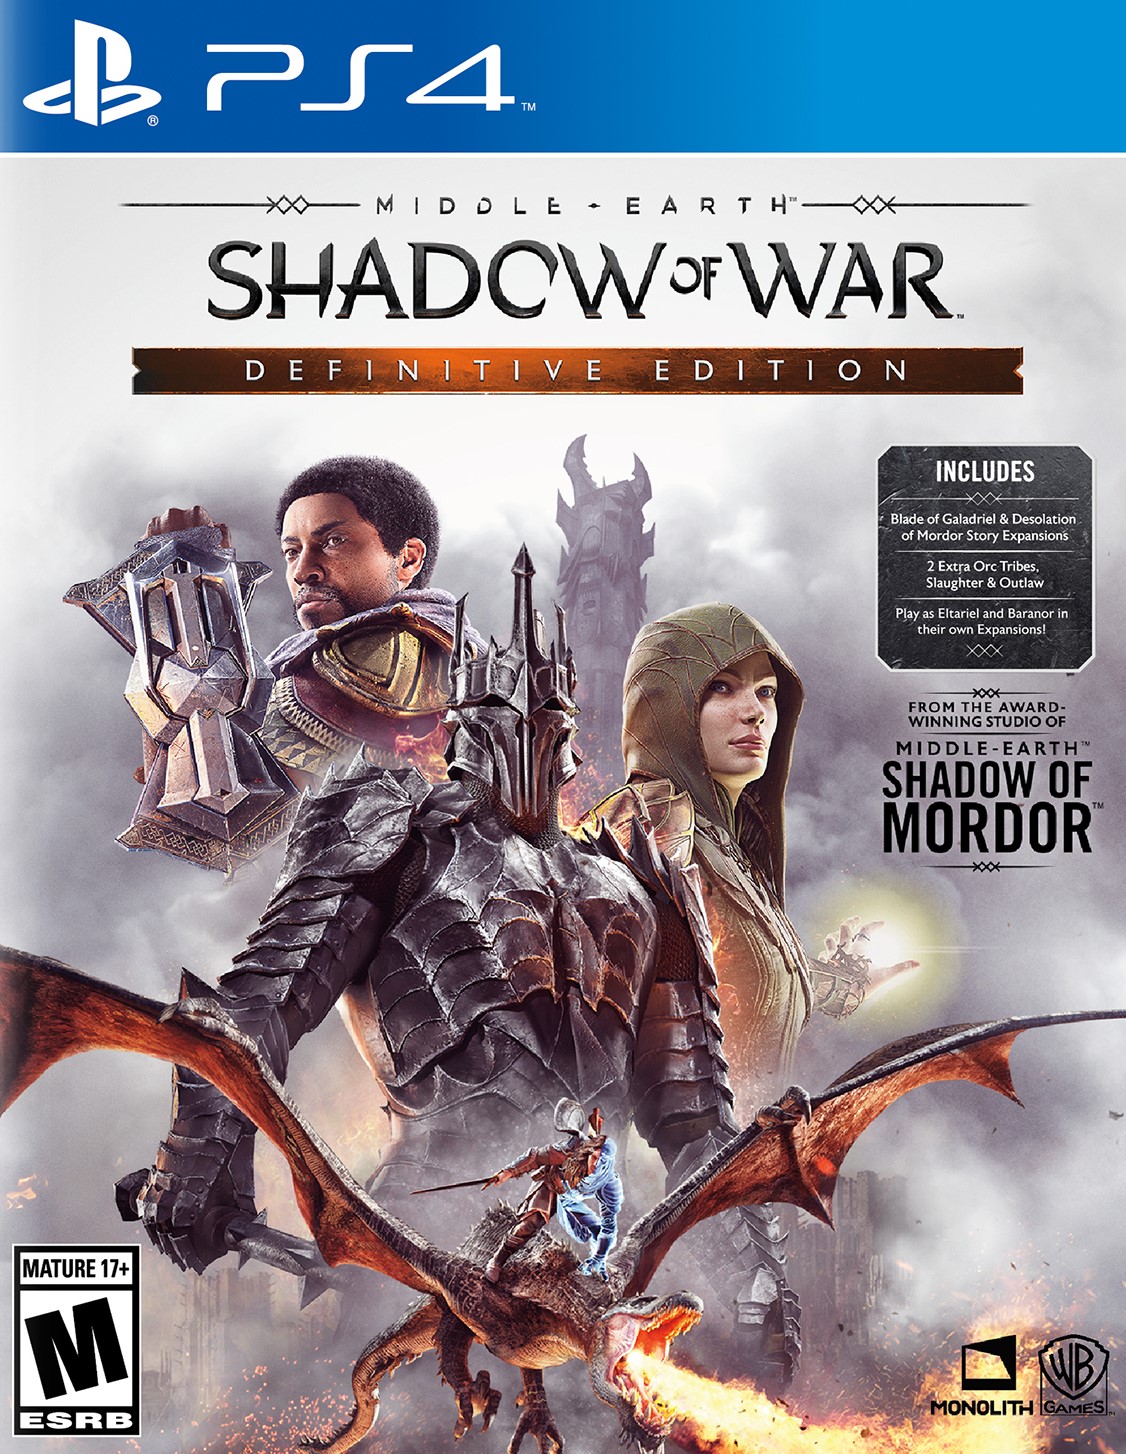 Middle-earth: Shadow of War - Definitive Edition [PS4] 5.05 / 6.72 / 7.02 [EUR] (2018) [Русский] (v1.18)